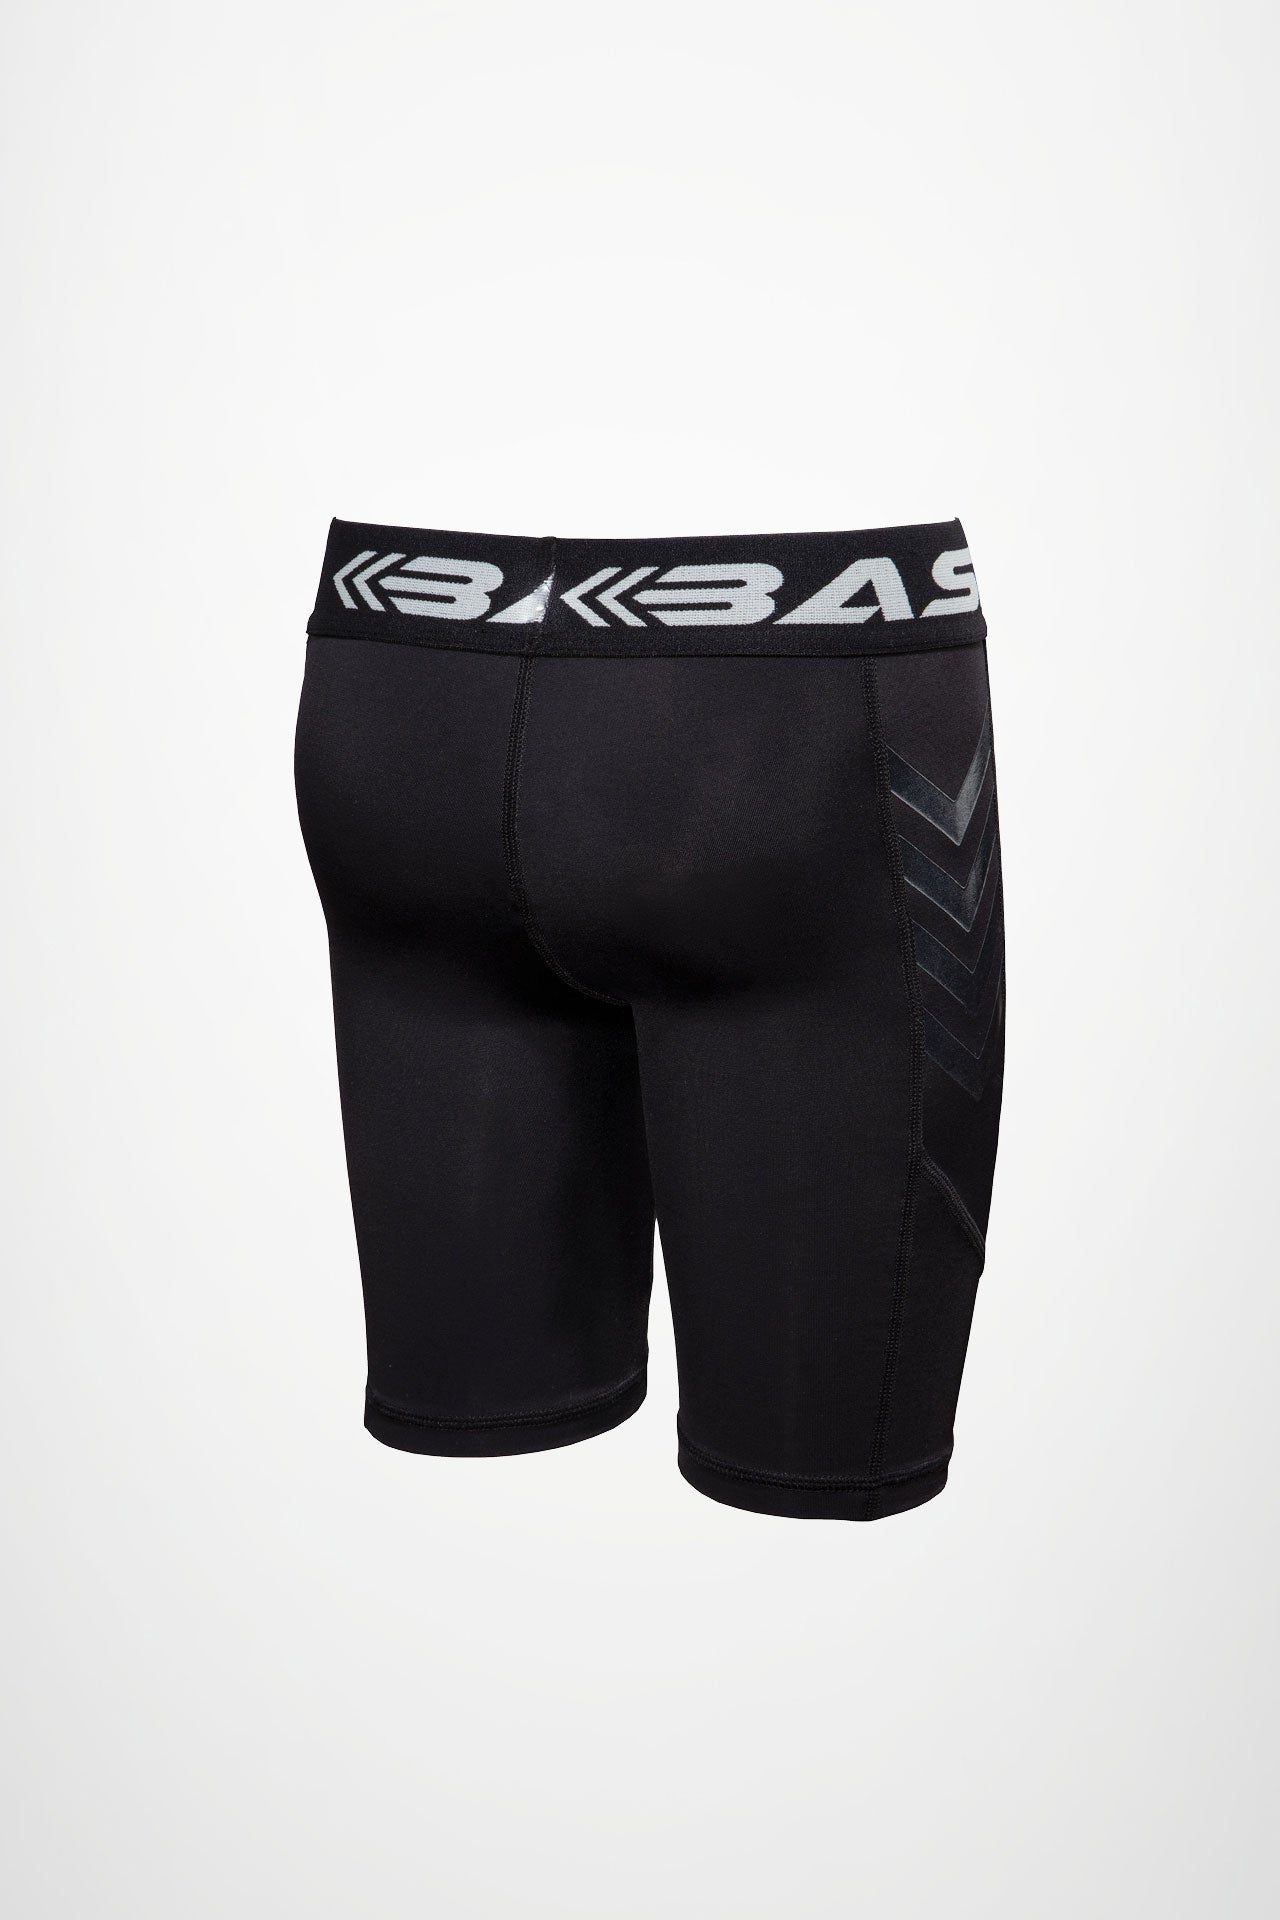 BASE Youth Compression Shorts - 2 for $60